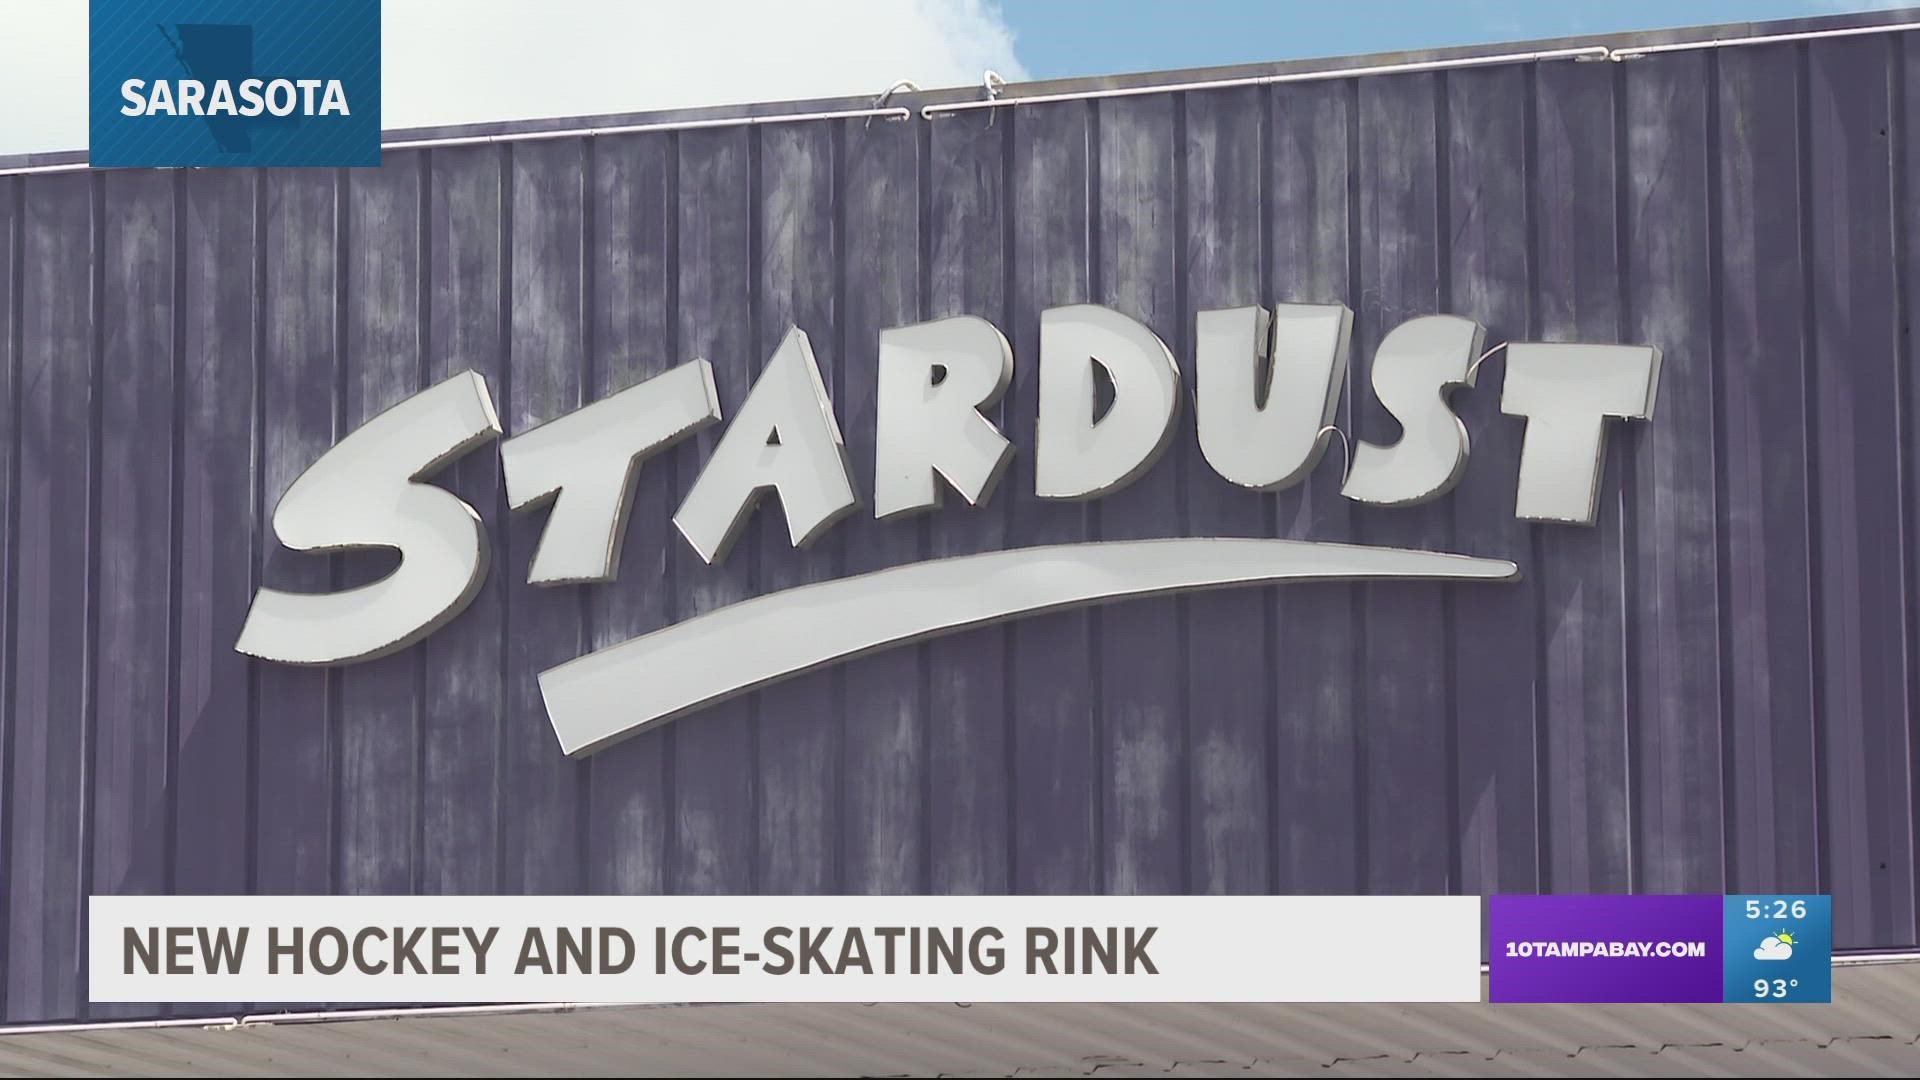 It will host youth hockey tournaments, adult hockey leagues and skating lessons.